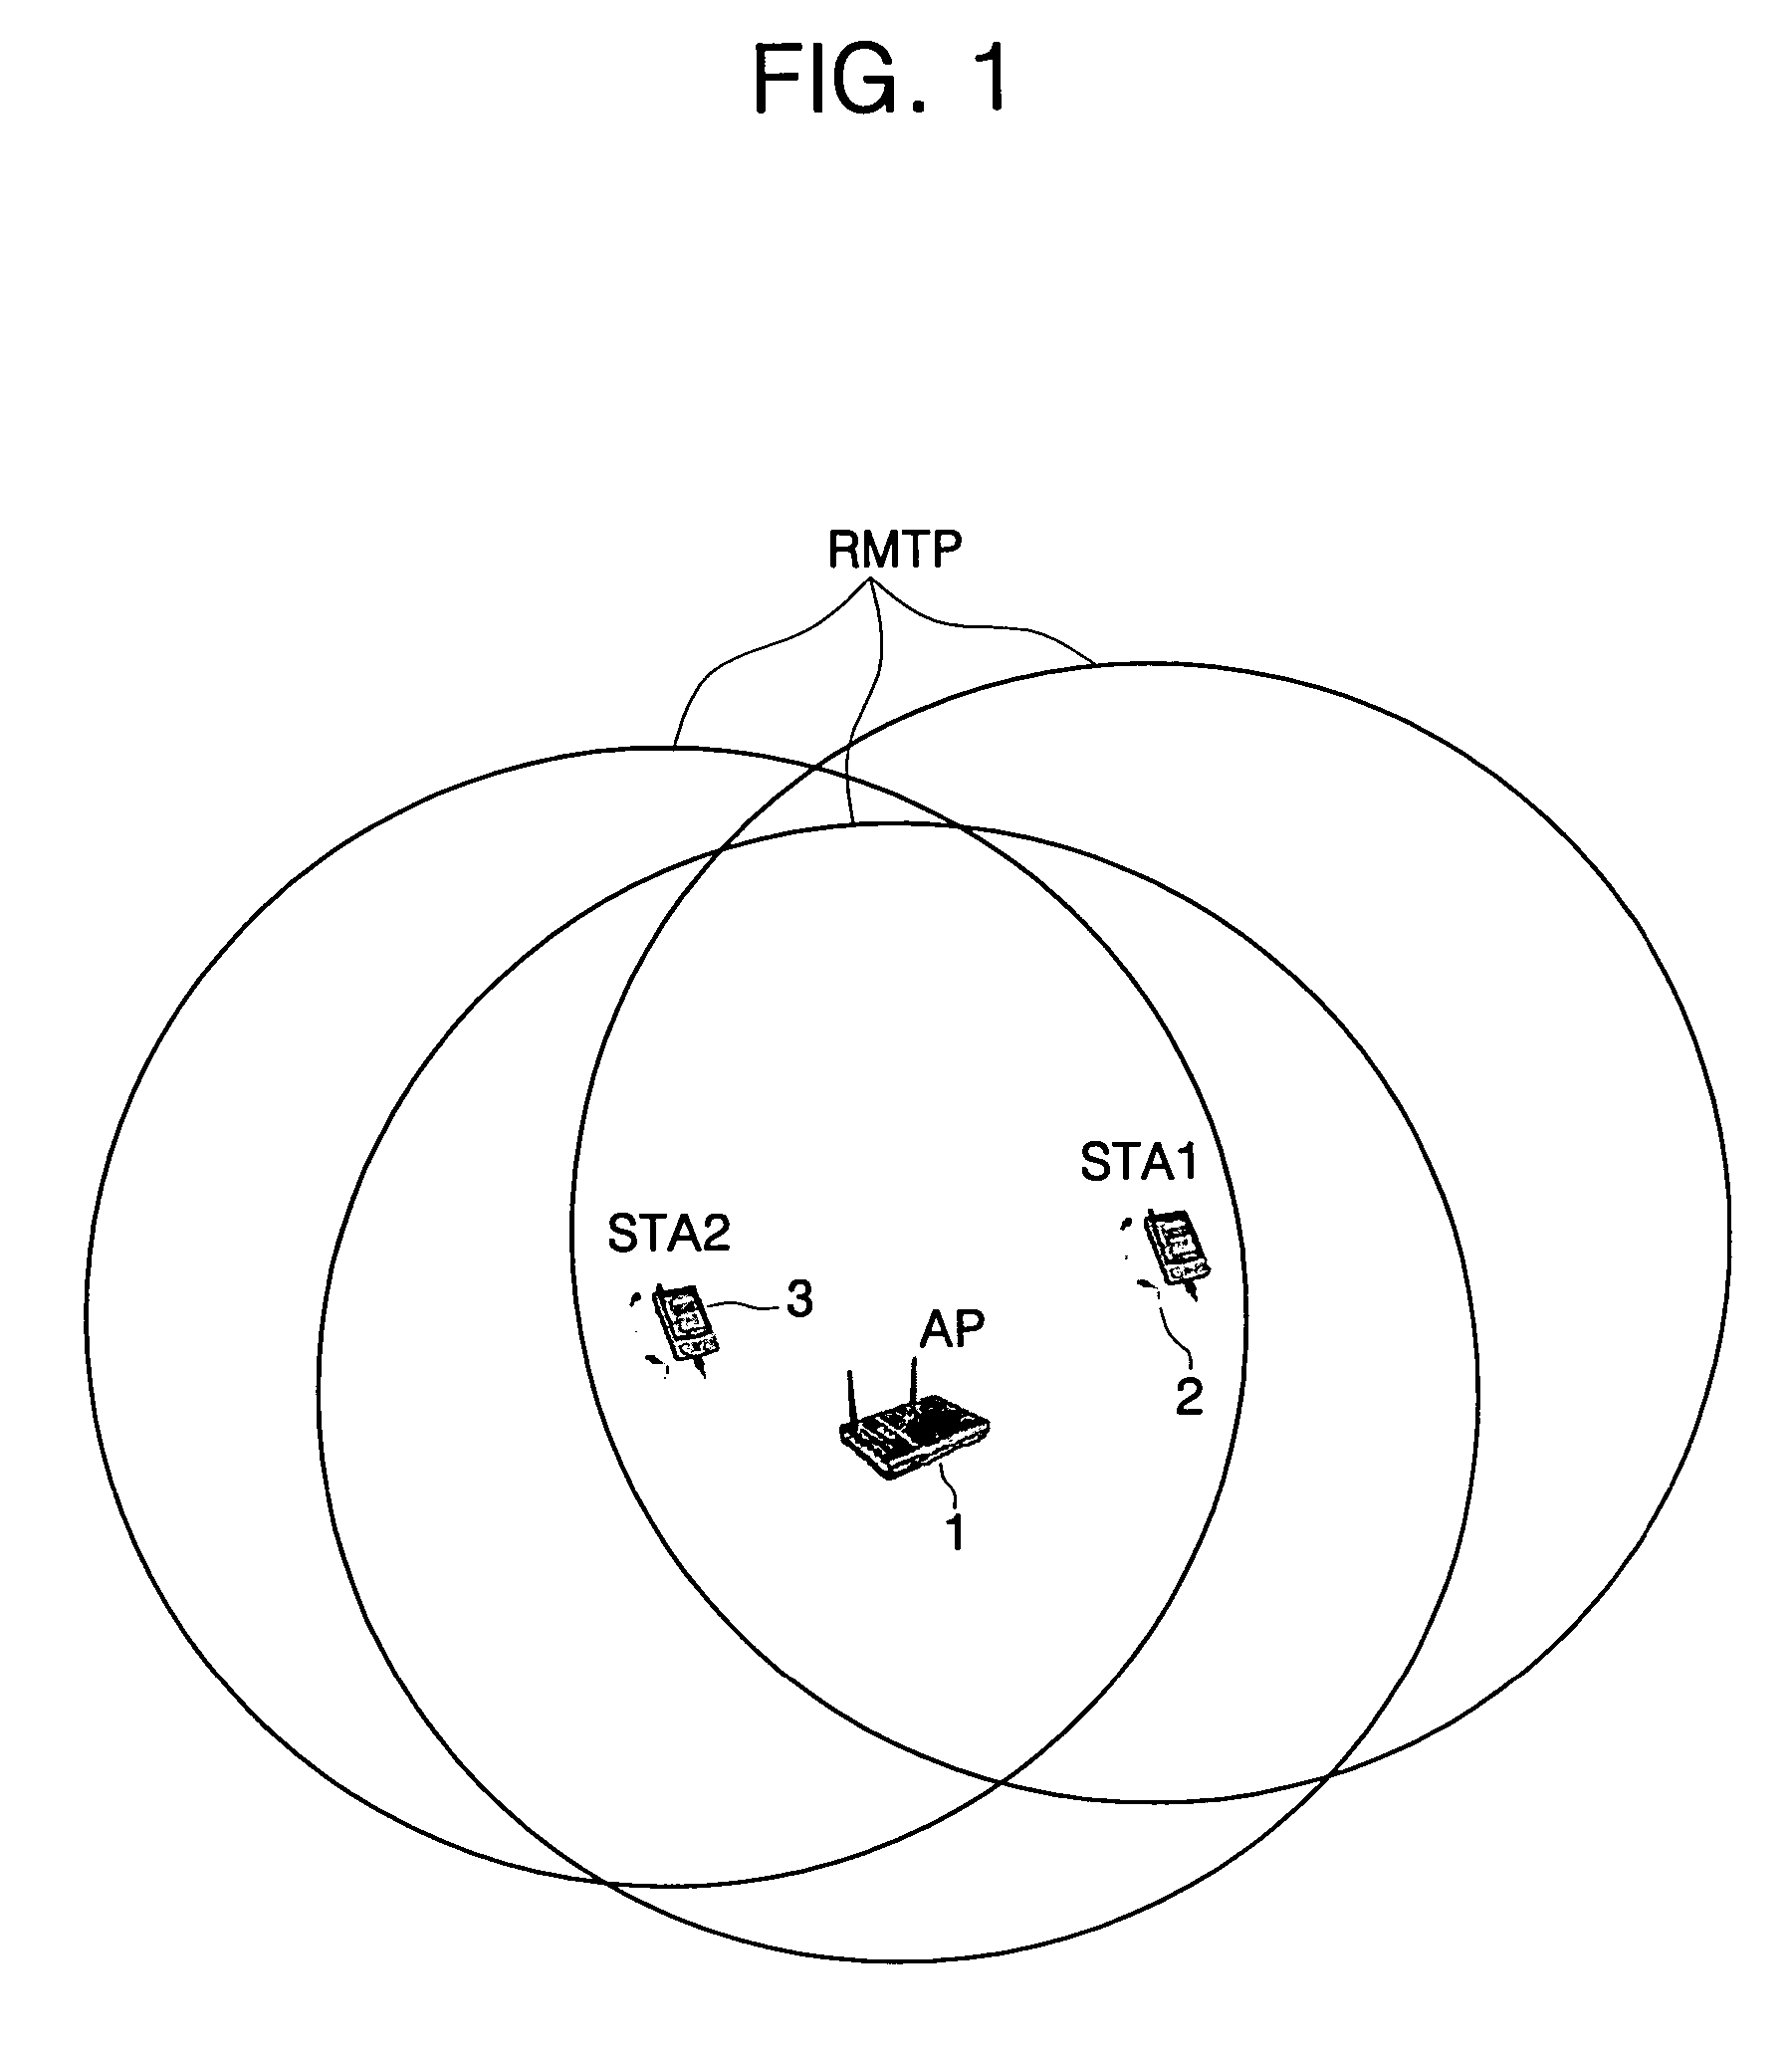 System of wireless local area network based on transmit power control and method for controlling transmit power